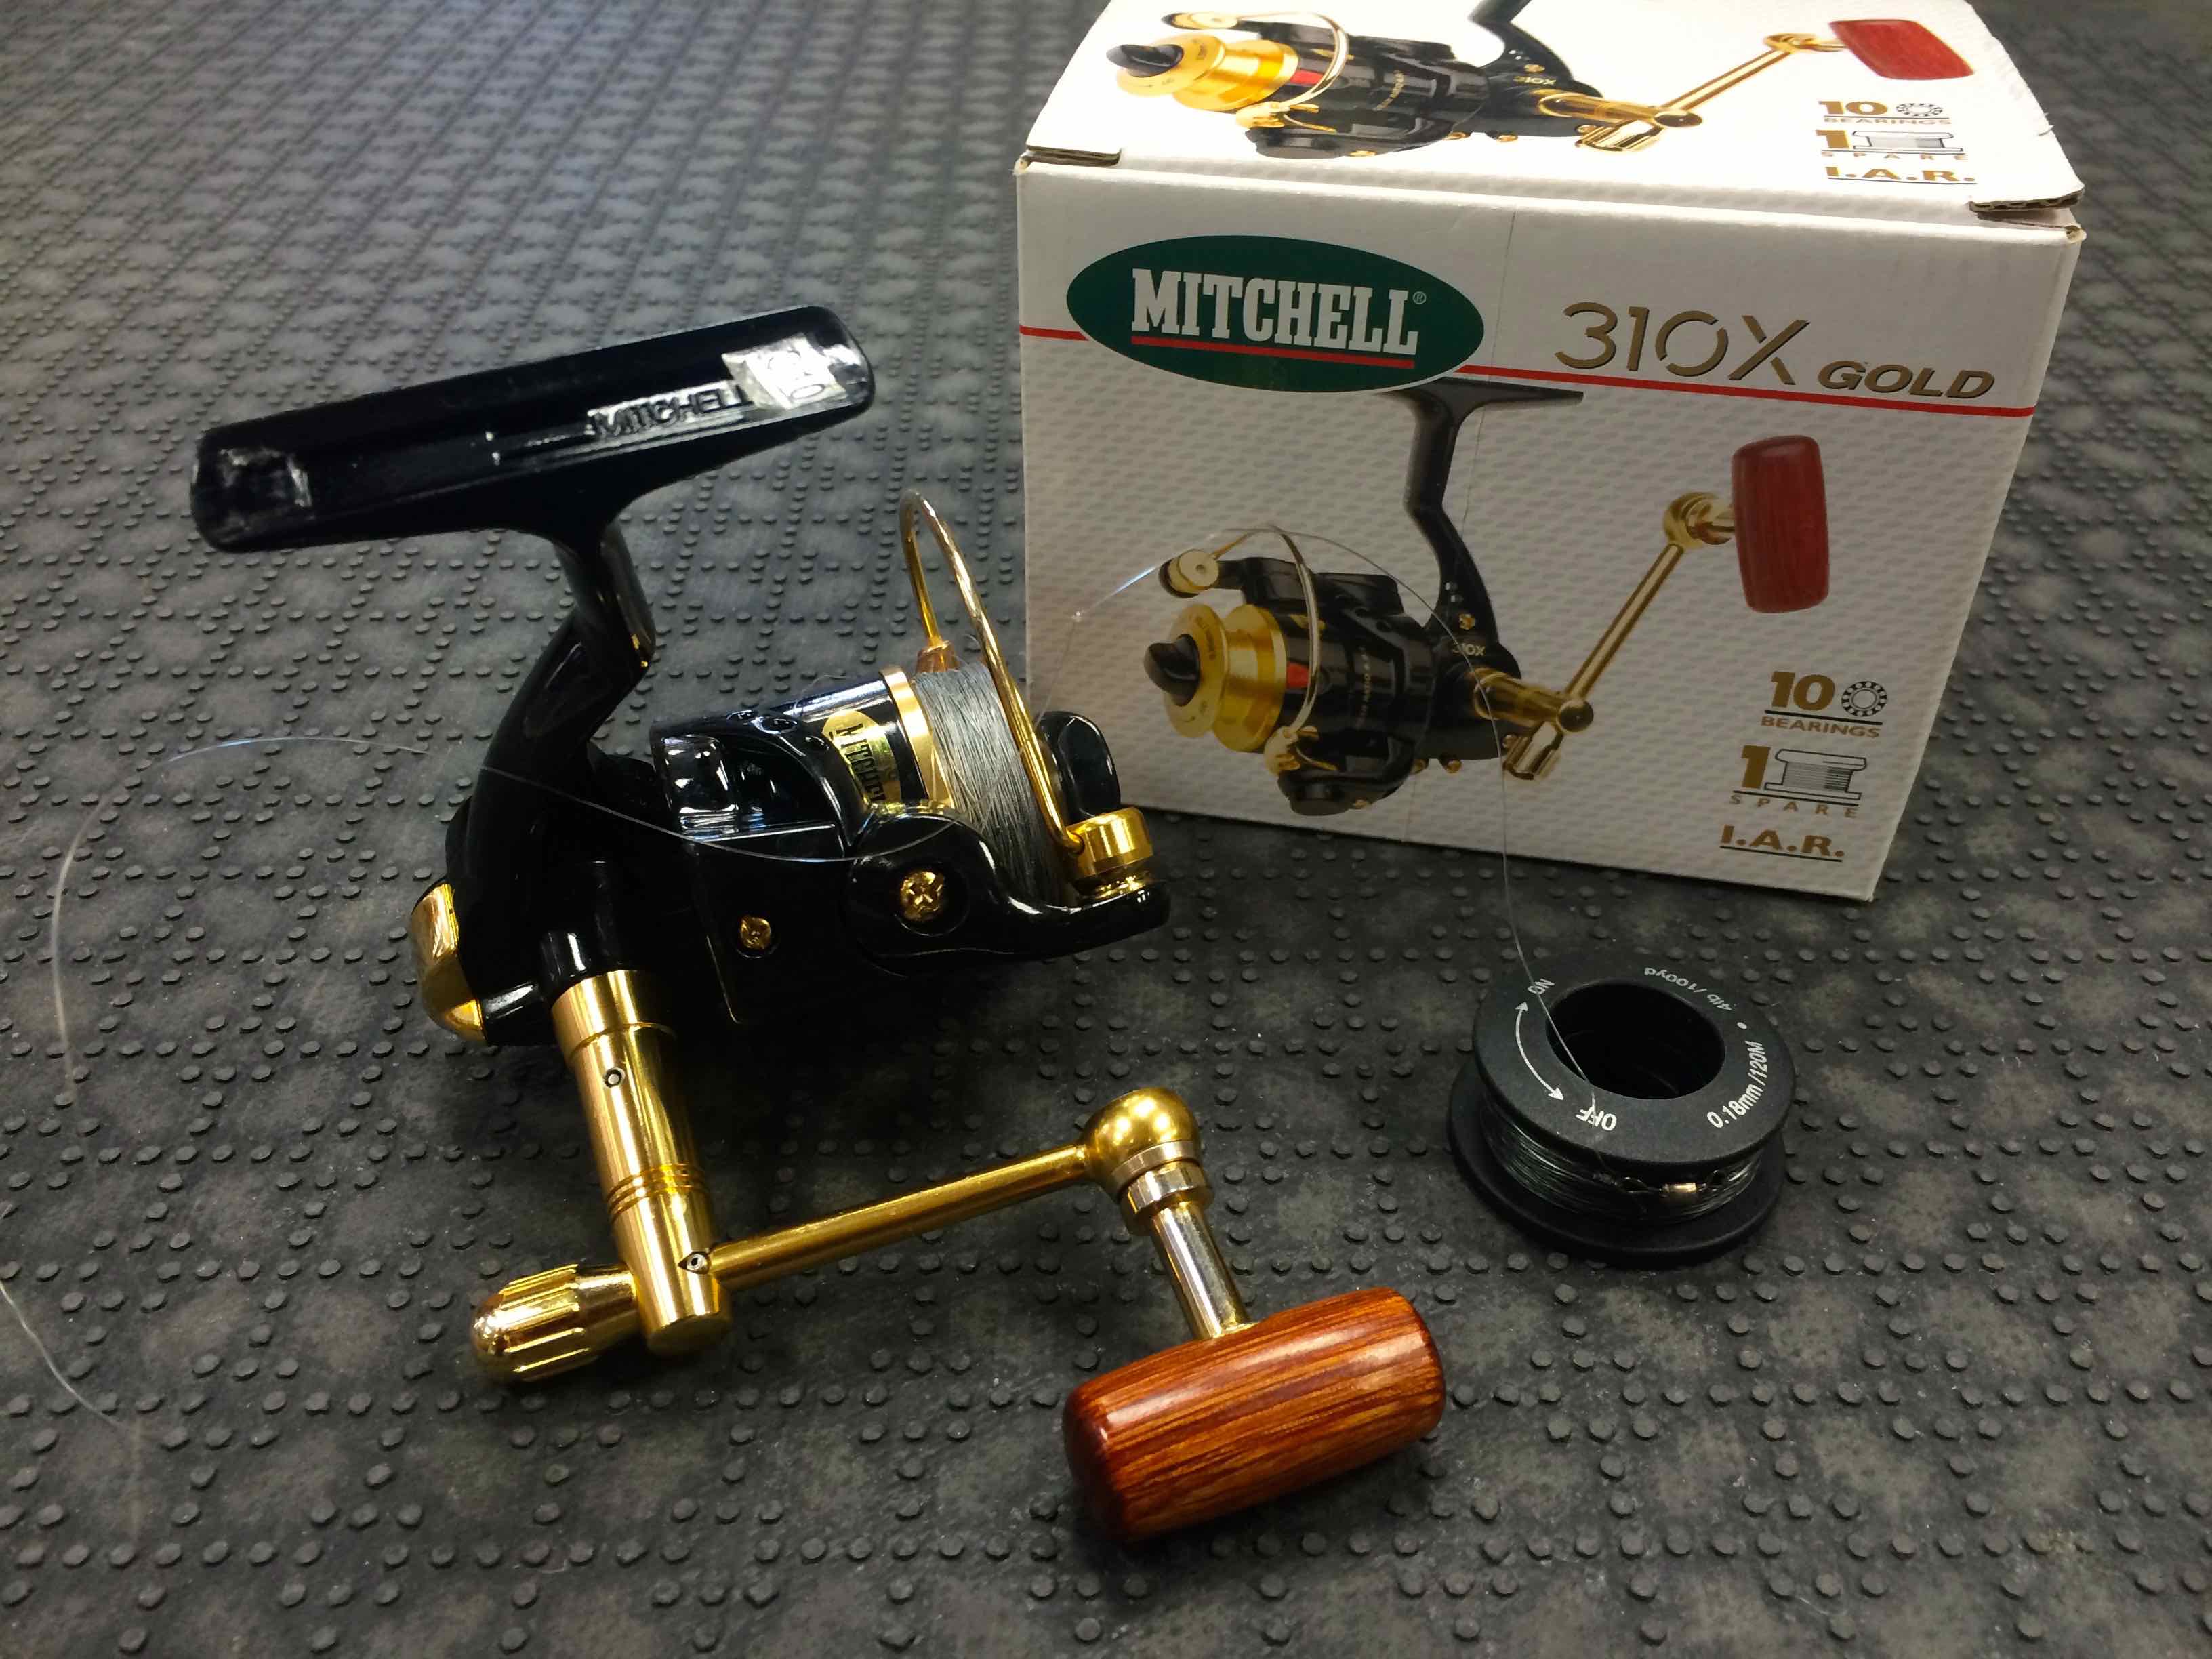 https://thefirstcast.ca/wp-content/uploads/2016/02/Mitchell-310X-Gold-Spinning-Reel-with-Spare-Spool-AA.jpg